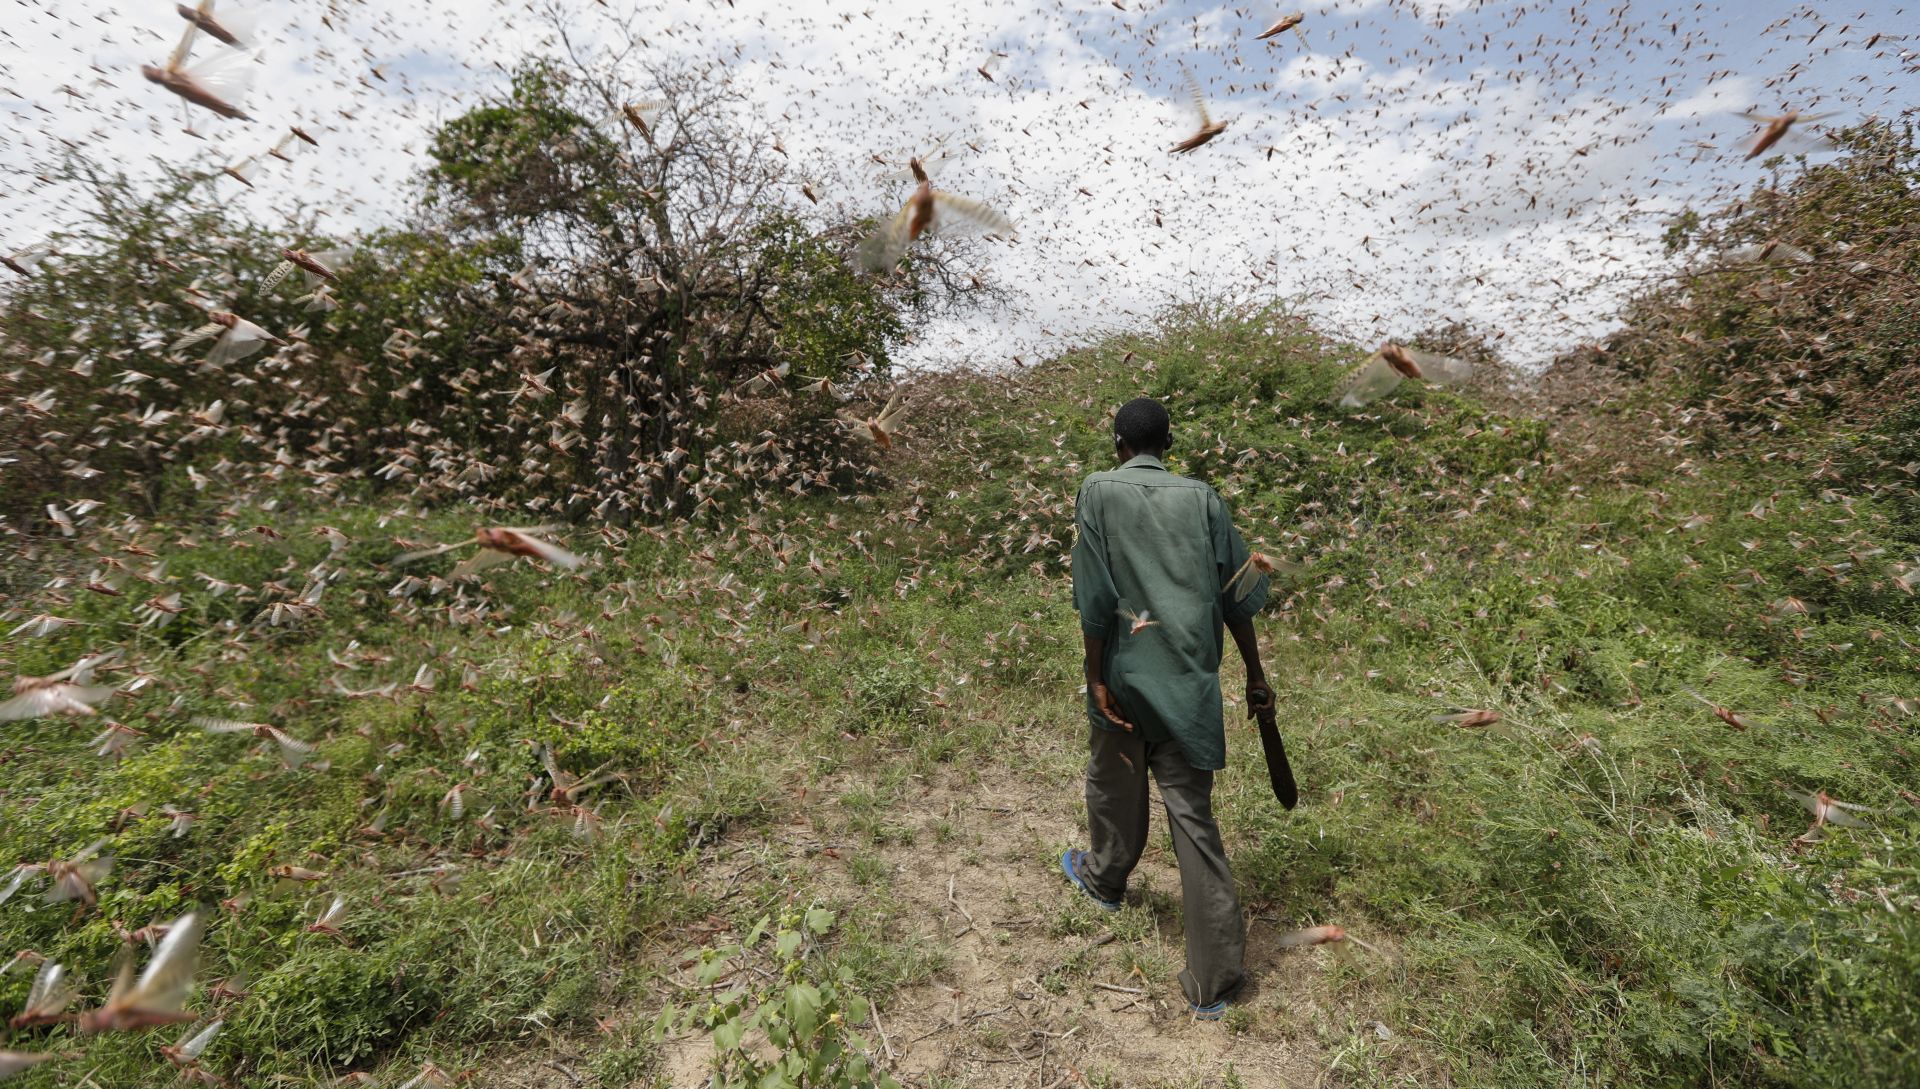 epa08158652 A man walks through a swarm of desert locusts to chase them away in the bush near Enziu, Kitui County, some 200km east of the capital Nairobi, Kenya, 24 January 2020. Large swarms of desert locusts have been invading Kenya for weeks, after having infested some 70 thousand hectares of land in Somalia which the United Nations Food and Agriculture Organisation (FAO) has termed the 'worst situation in 25 years' in the Horn of Africa. FAO cautioned that it poses an 'unprecedented threat' to food security and livelihoods in the region.  EPA/DAI KUROKAWA